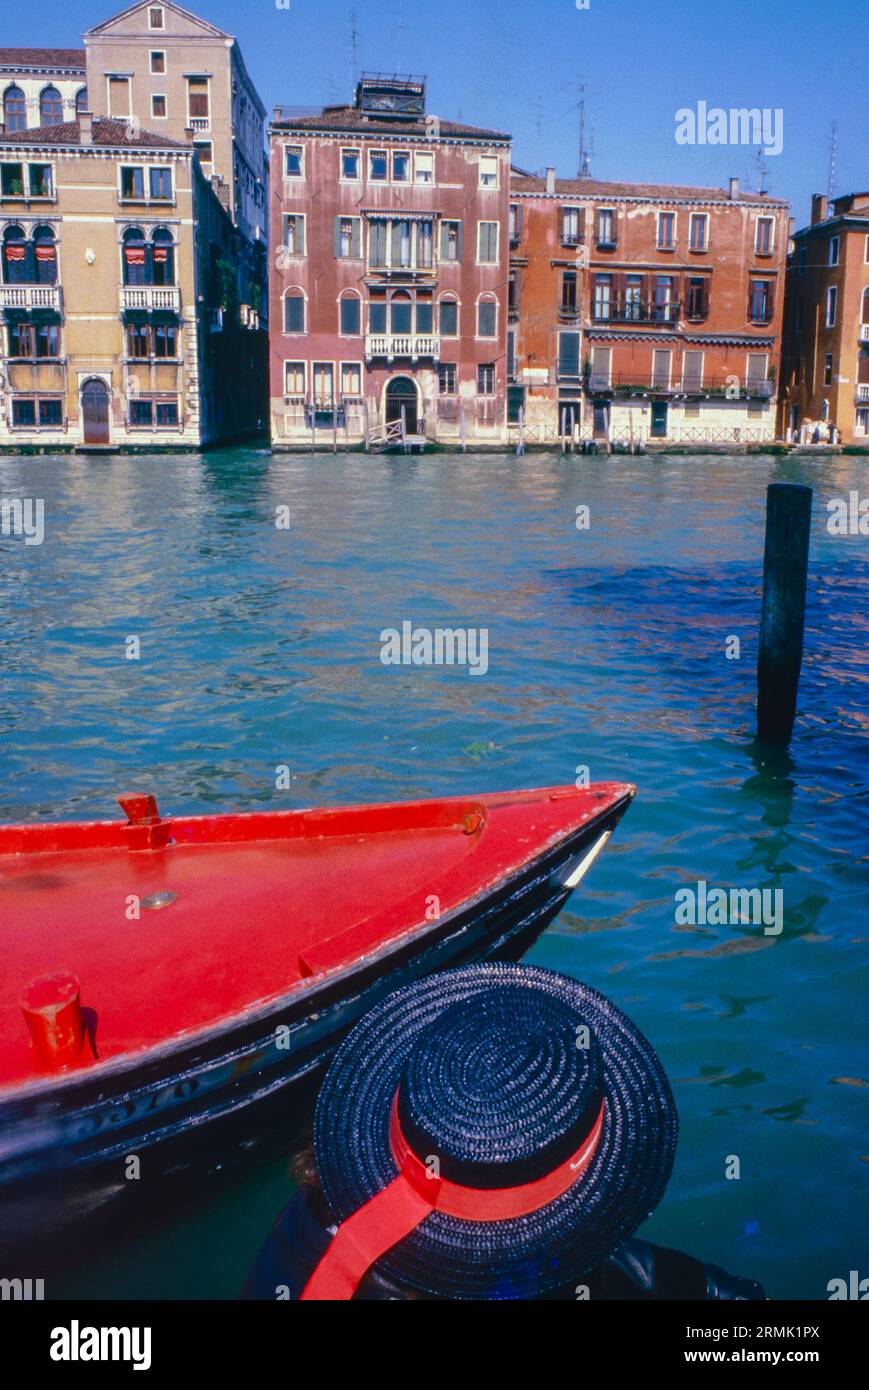 Typical Venetian hat in front of the Venice canal Stock Photo